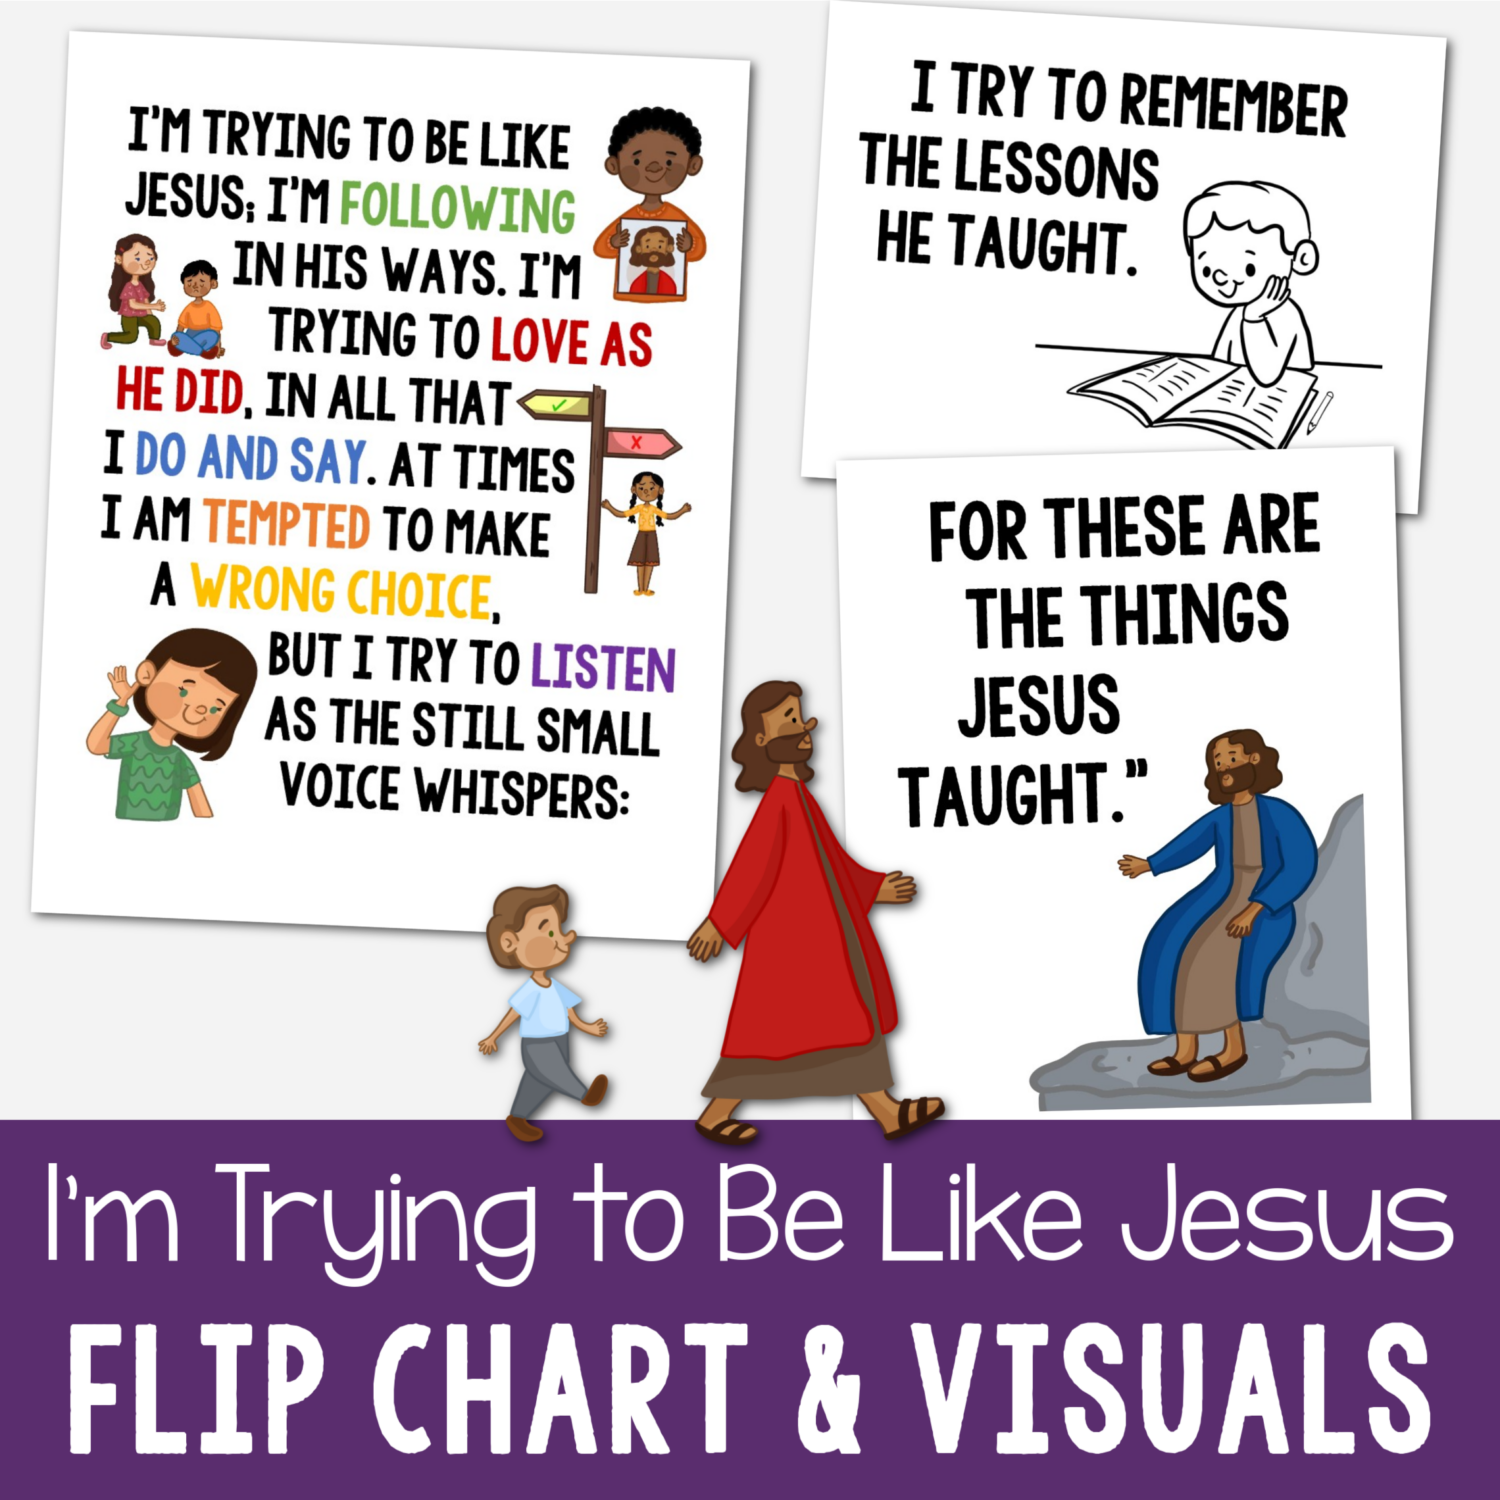 I'm Trying to Be Like Jesus Flip Chart with beautiful custom art illustrations for pictures and lyrics together to help you teach this song. A great printable resource for LDS Primary music leaders for singing time or for home Come Follow Me use.